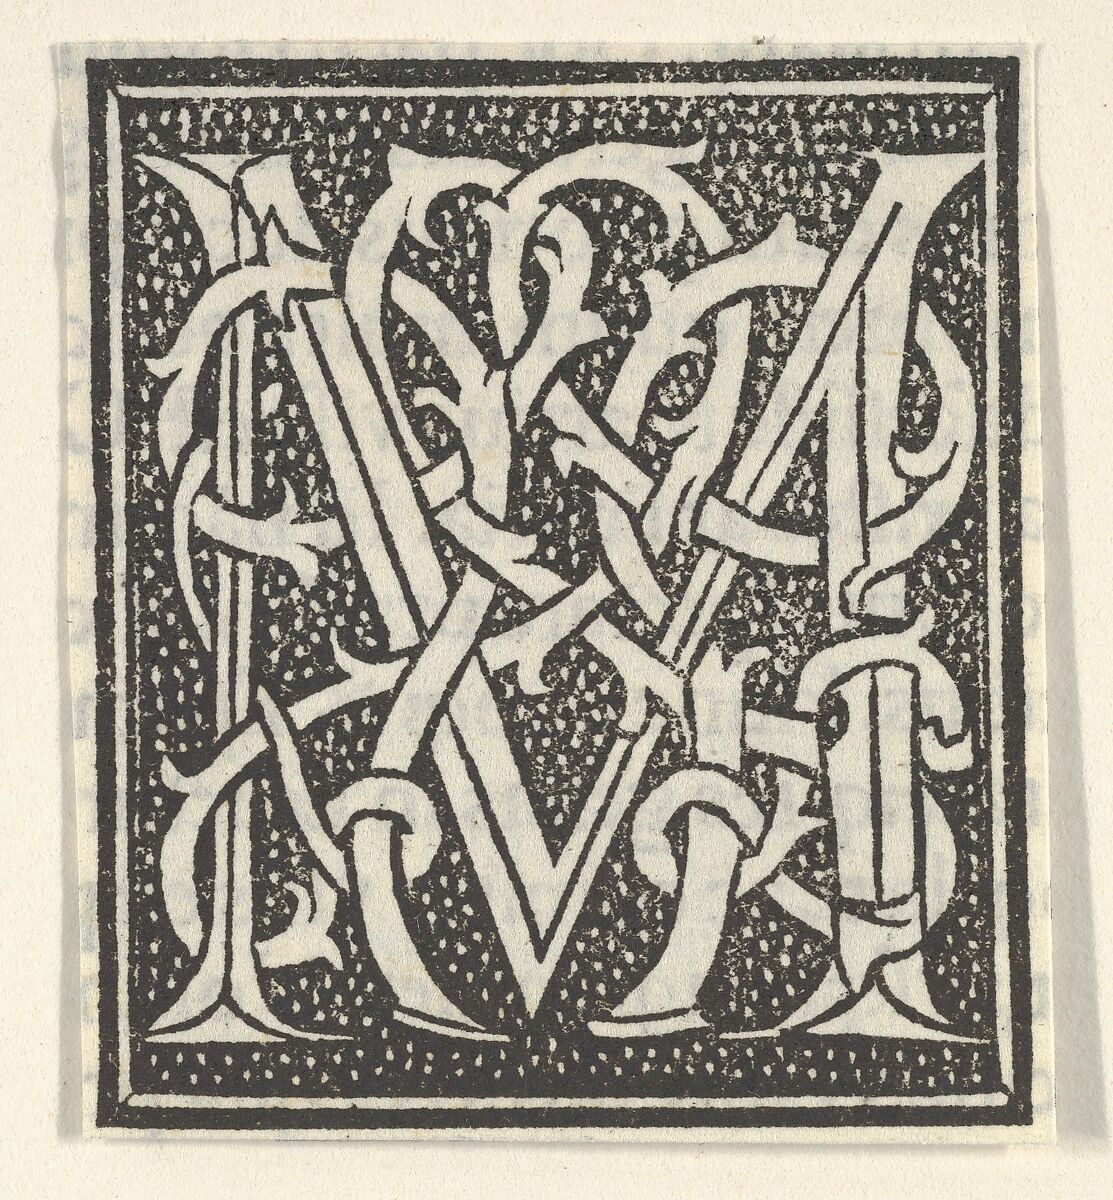 Initial letter M on patterned background, Anonymous, Italian, 16th century, Woodcut, criblé ground 